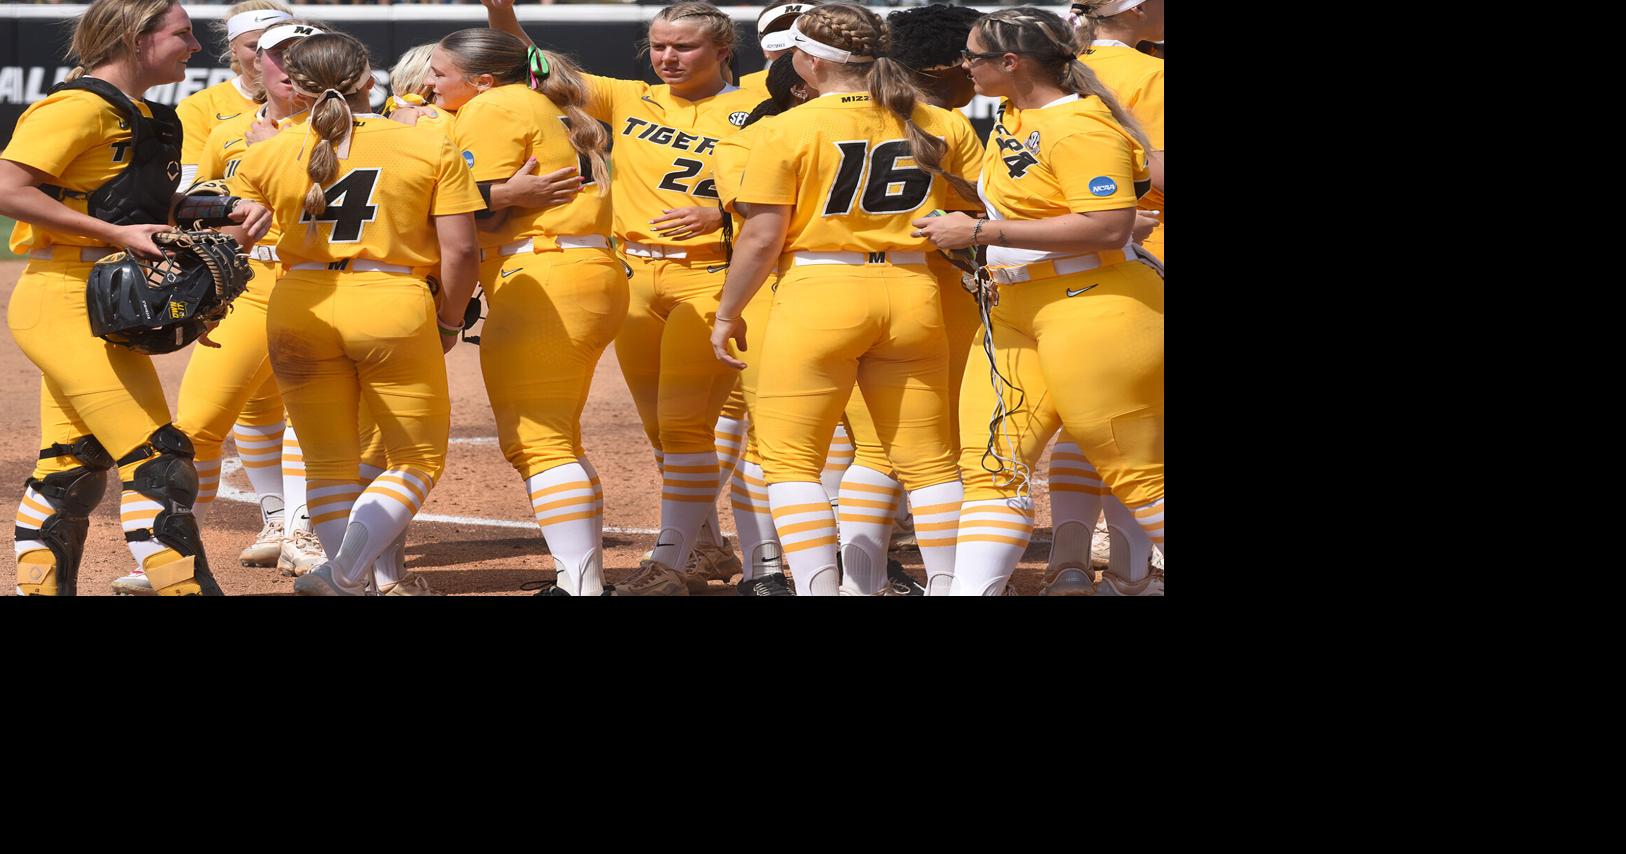 Mizzou stages comeback to secure Regional victory and advance to Super Regionals | Sports